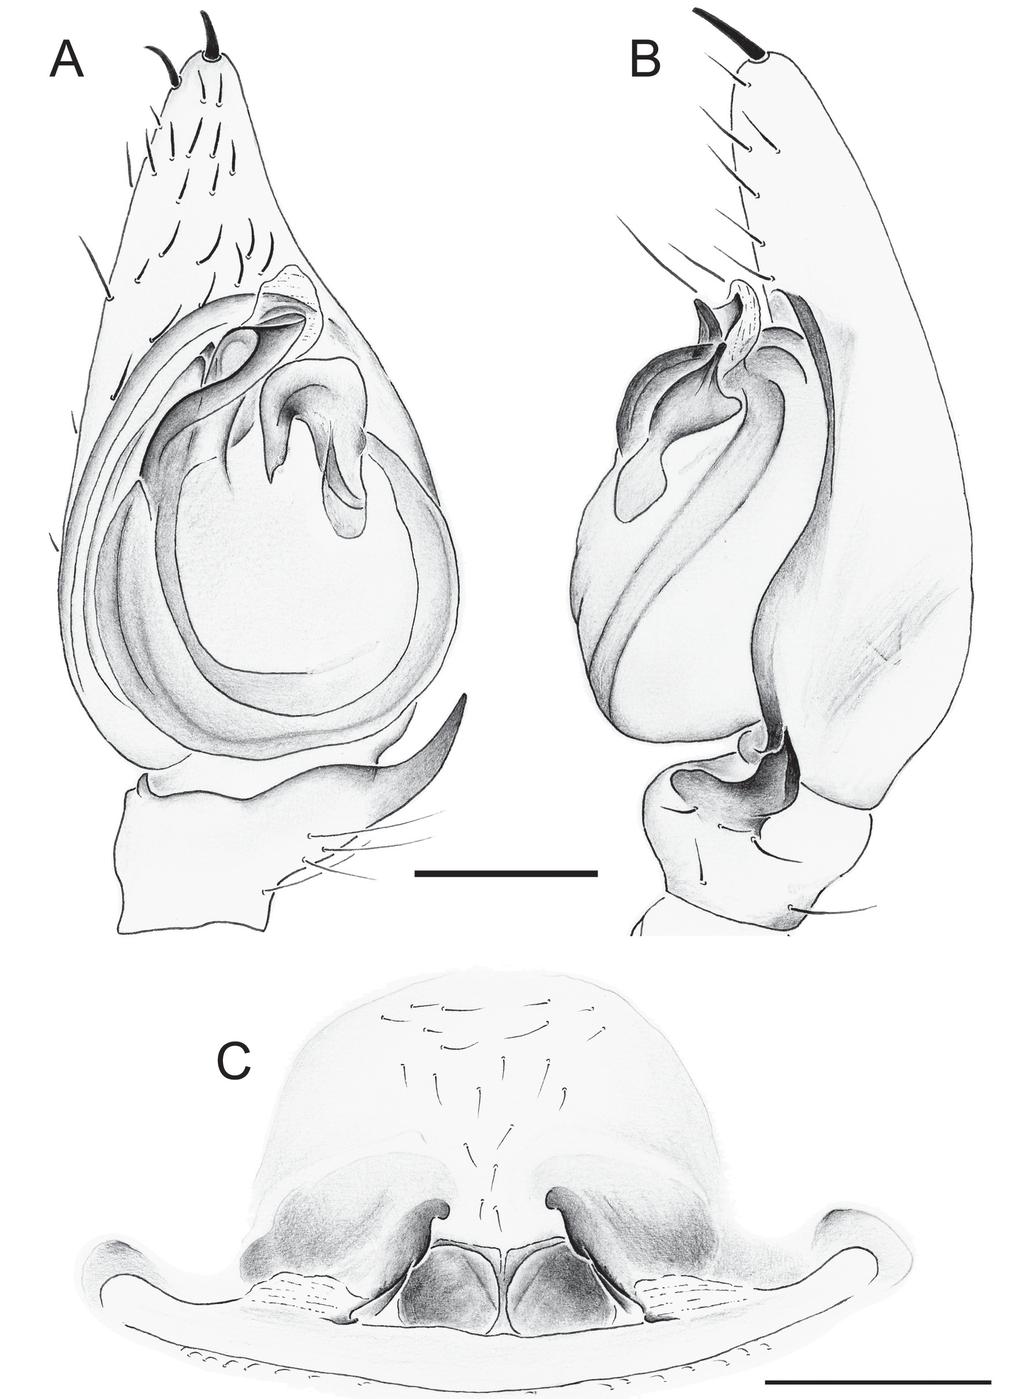 European Journal of Taxonomy 114: 1 23 (2015) Fig. 6. Acanthinozodium sahelense sp. nov. A B. Holotype. A. Palp, ventral view.